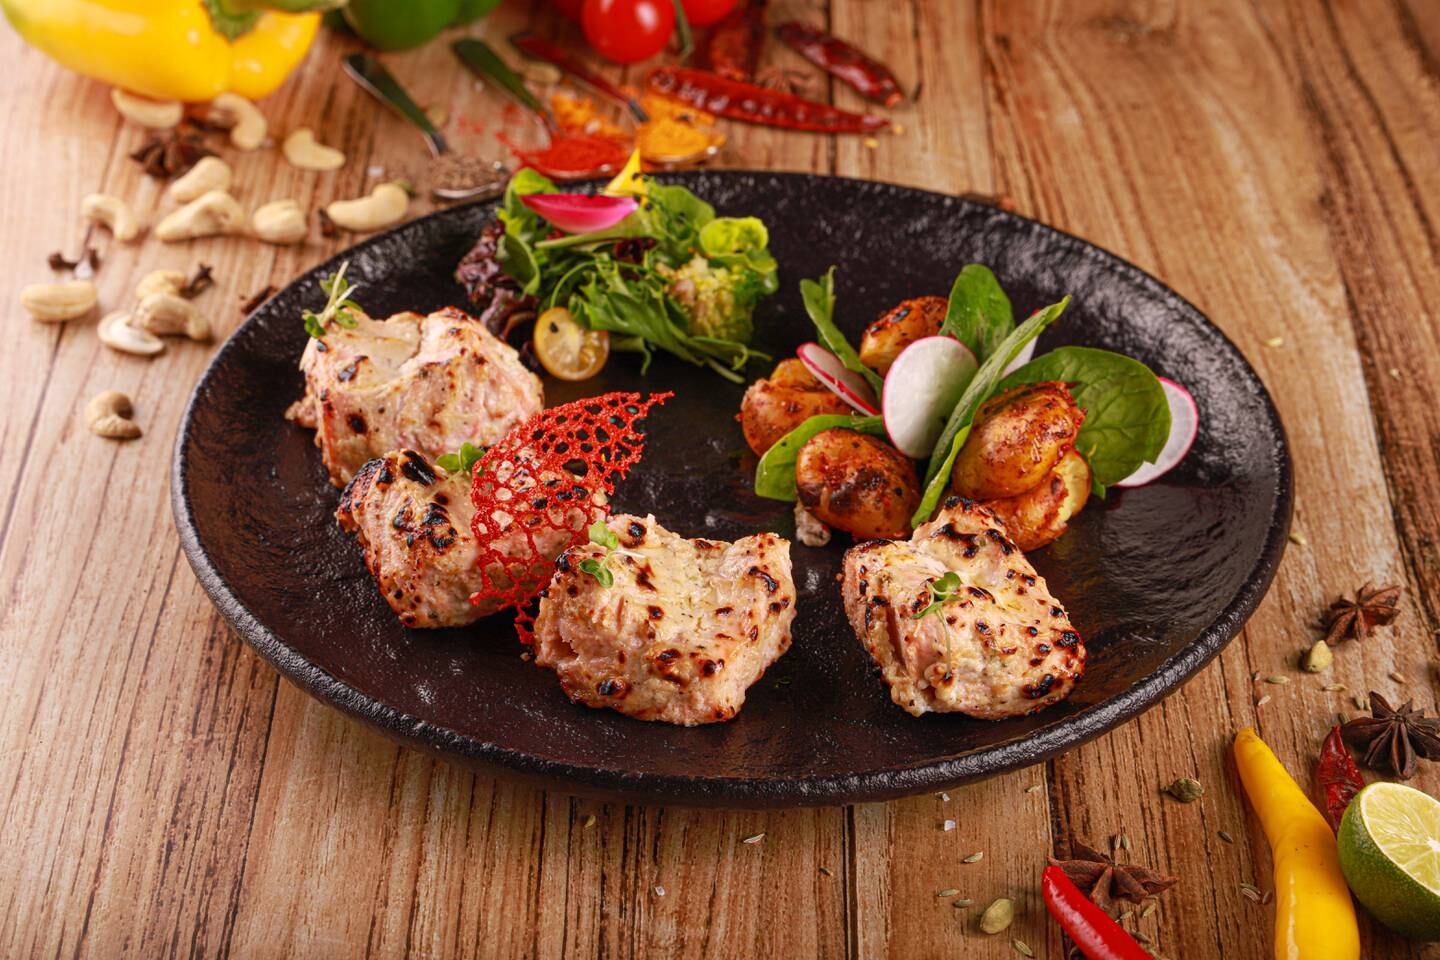 The spice-free but flavourful murg malai tikka. Photo: Laung by Peppermill